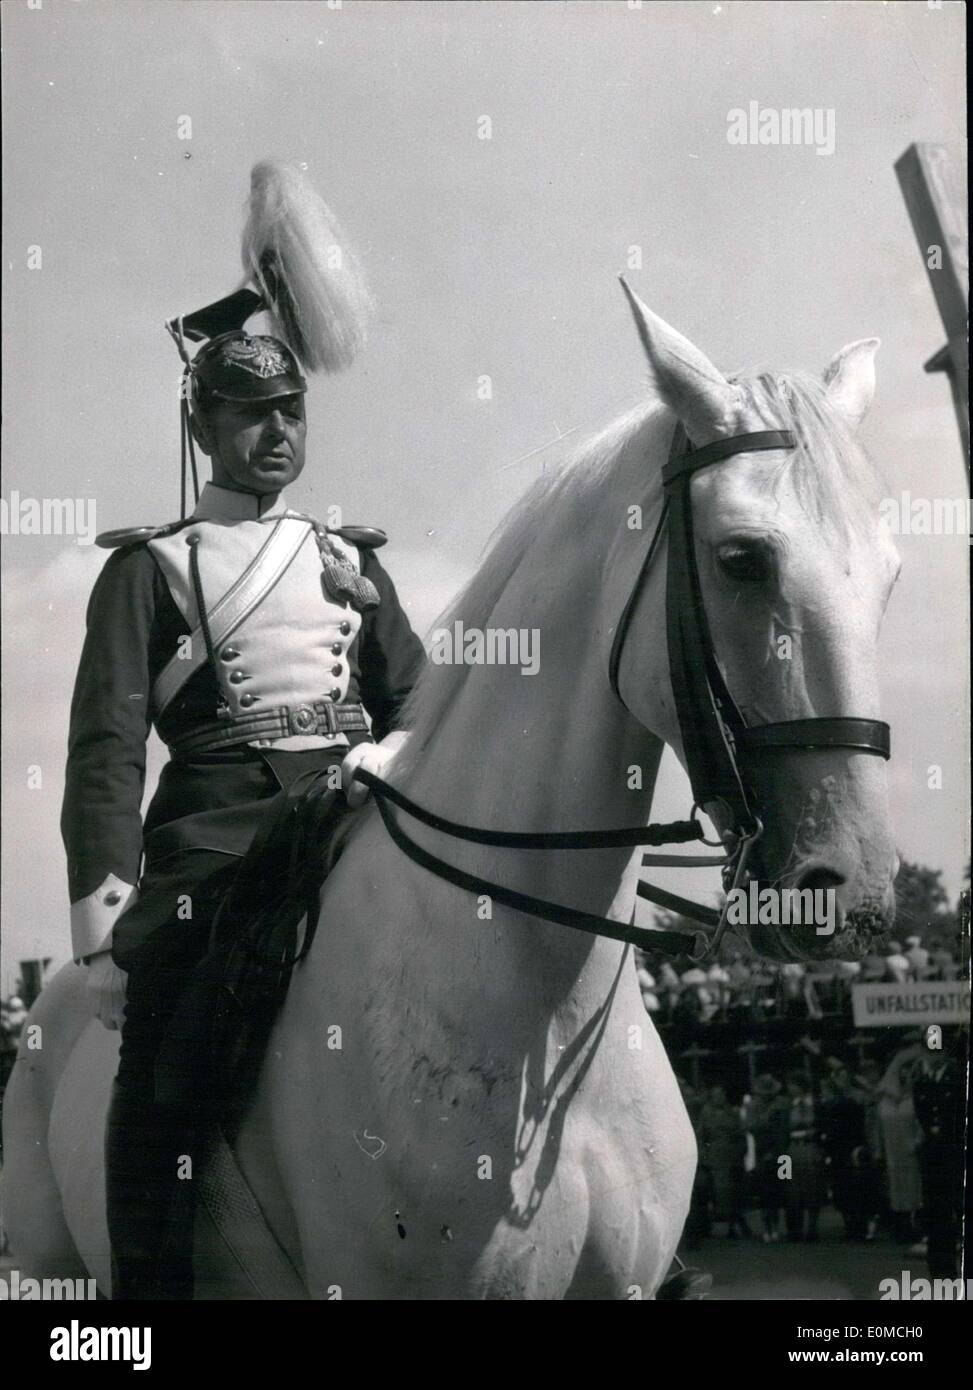 Jun. 27, 1954 - Pictured is a policeman at the Hamburg Police Sports Festival. He is wearing an old Uhlan uniform. It dates back to before World War I. Stock Photo